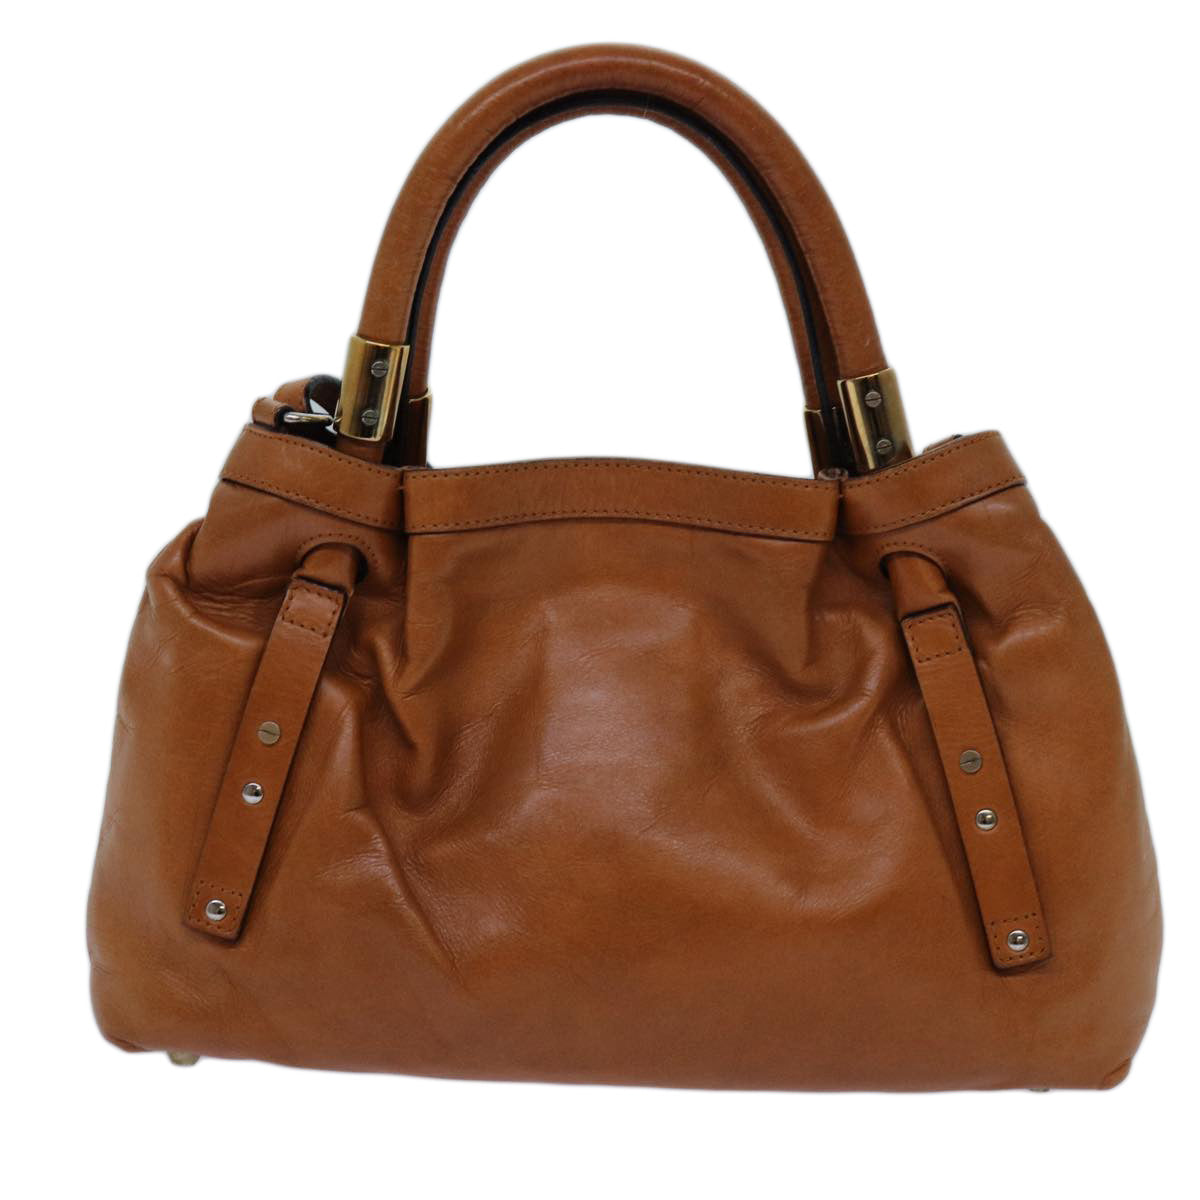 Chloe Victoria Hand Bag Leather 2way Brown Auth yk11966 - 0